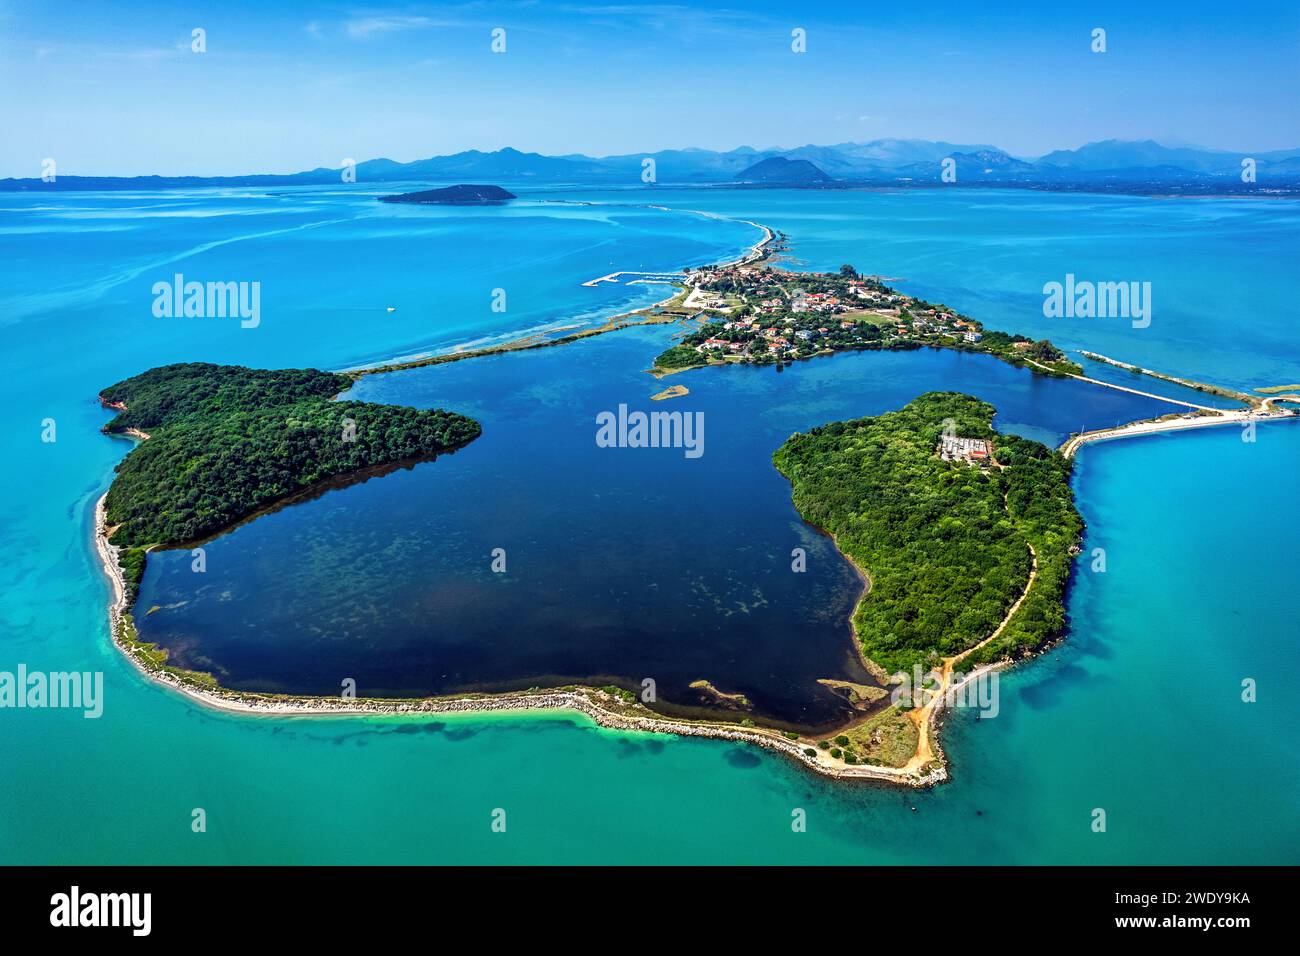 This is not some kind of atoll in the Indian or the Pacific Ocean. It is Koronissia island in the Ambracian ('Amvrakikos') gulf, Arta, Epirus, Greece. Stock Photo